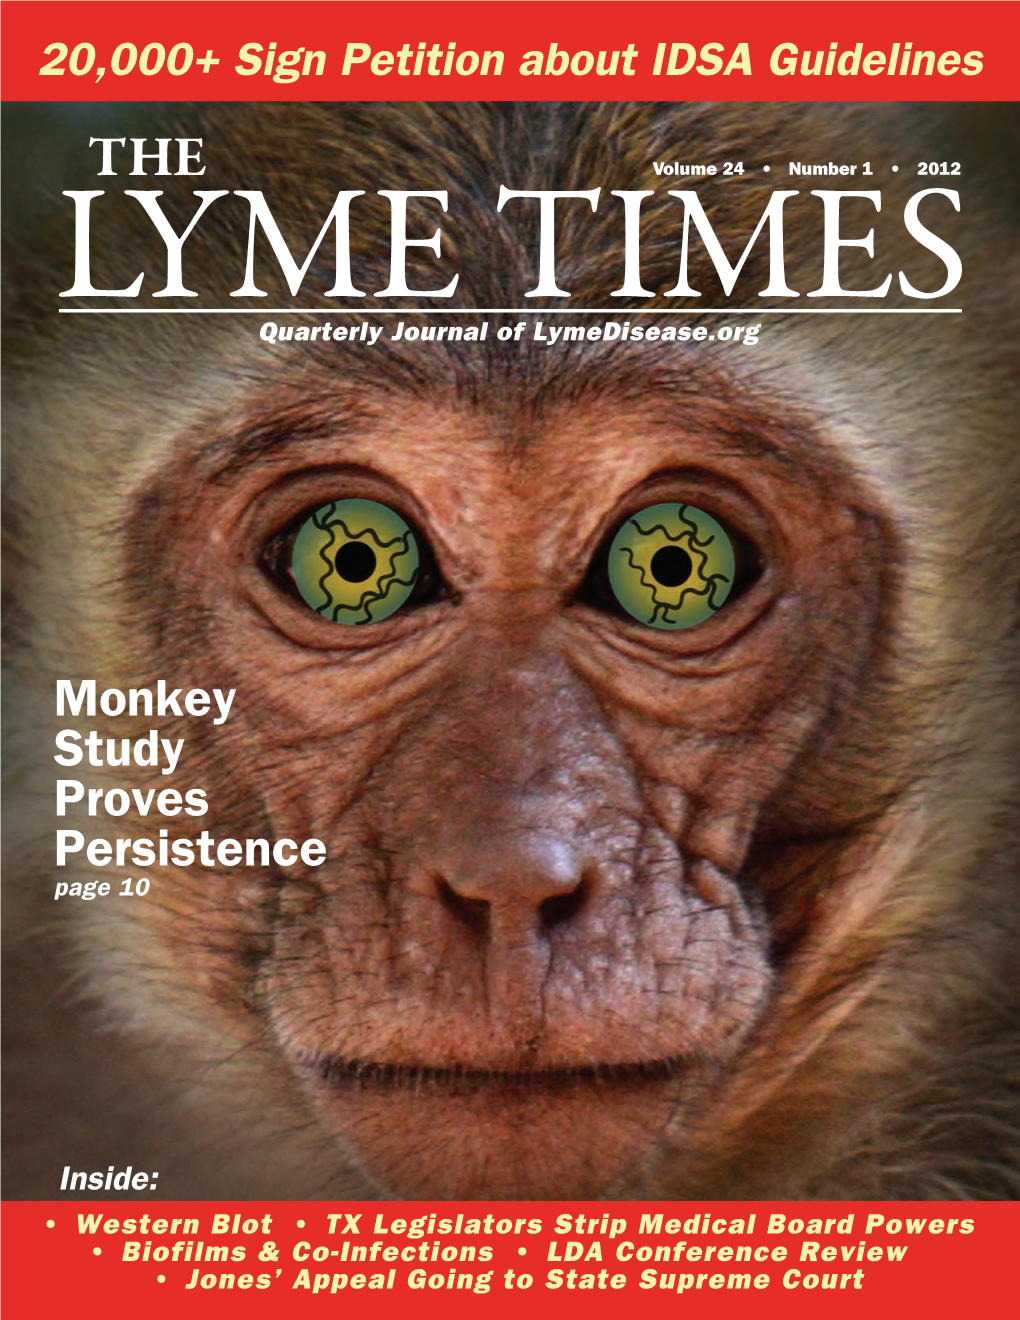 The Lyme Times, and Maintain an Educational Website At